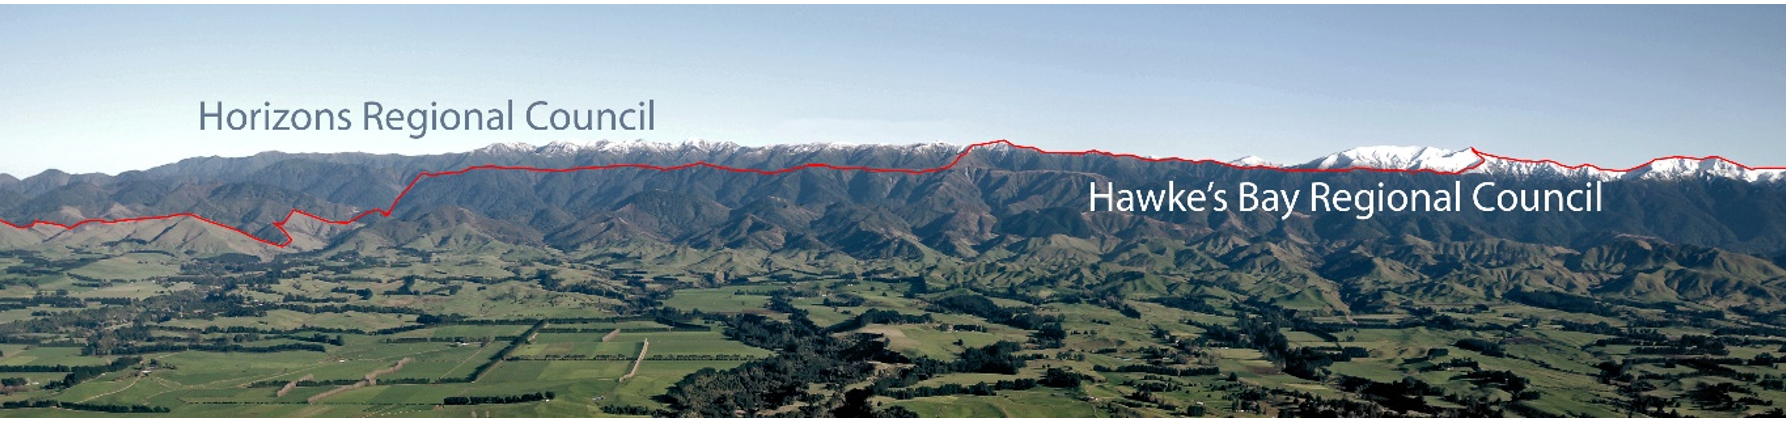 Landscape - Hills with dividing line between Horizons and Hawke's Bay Regional Councils